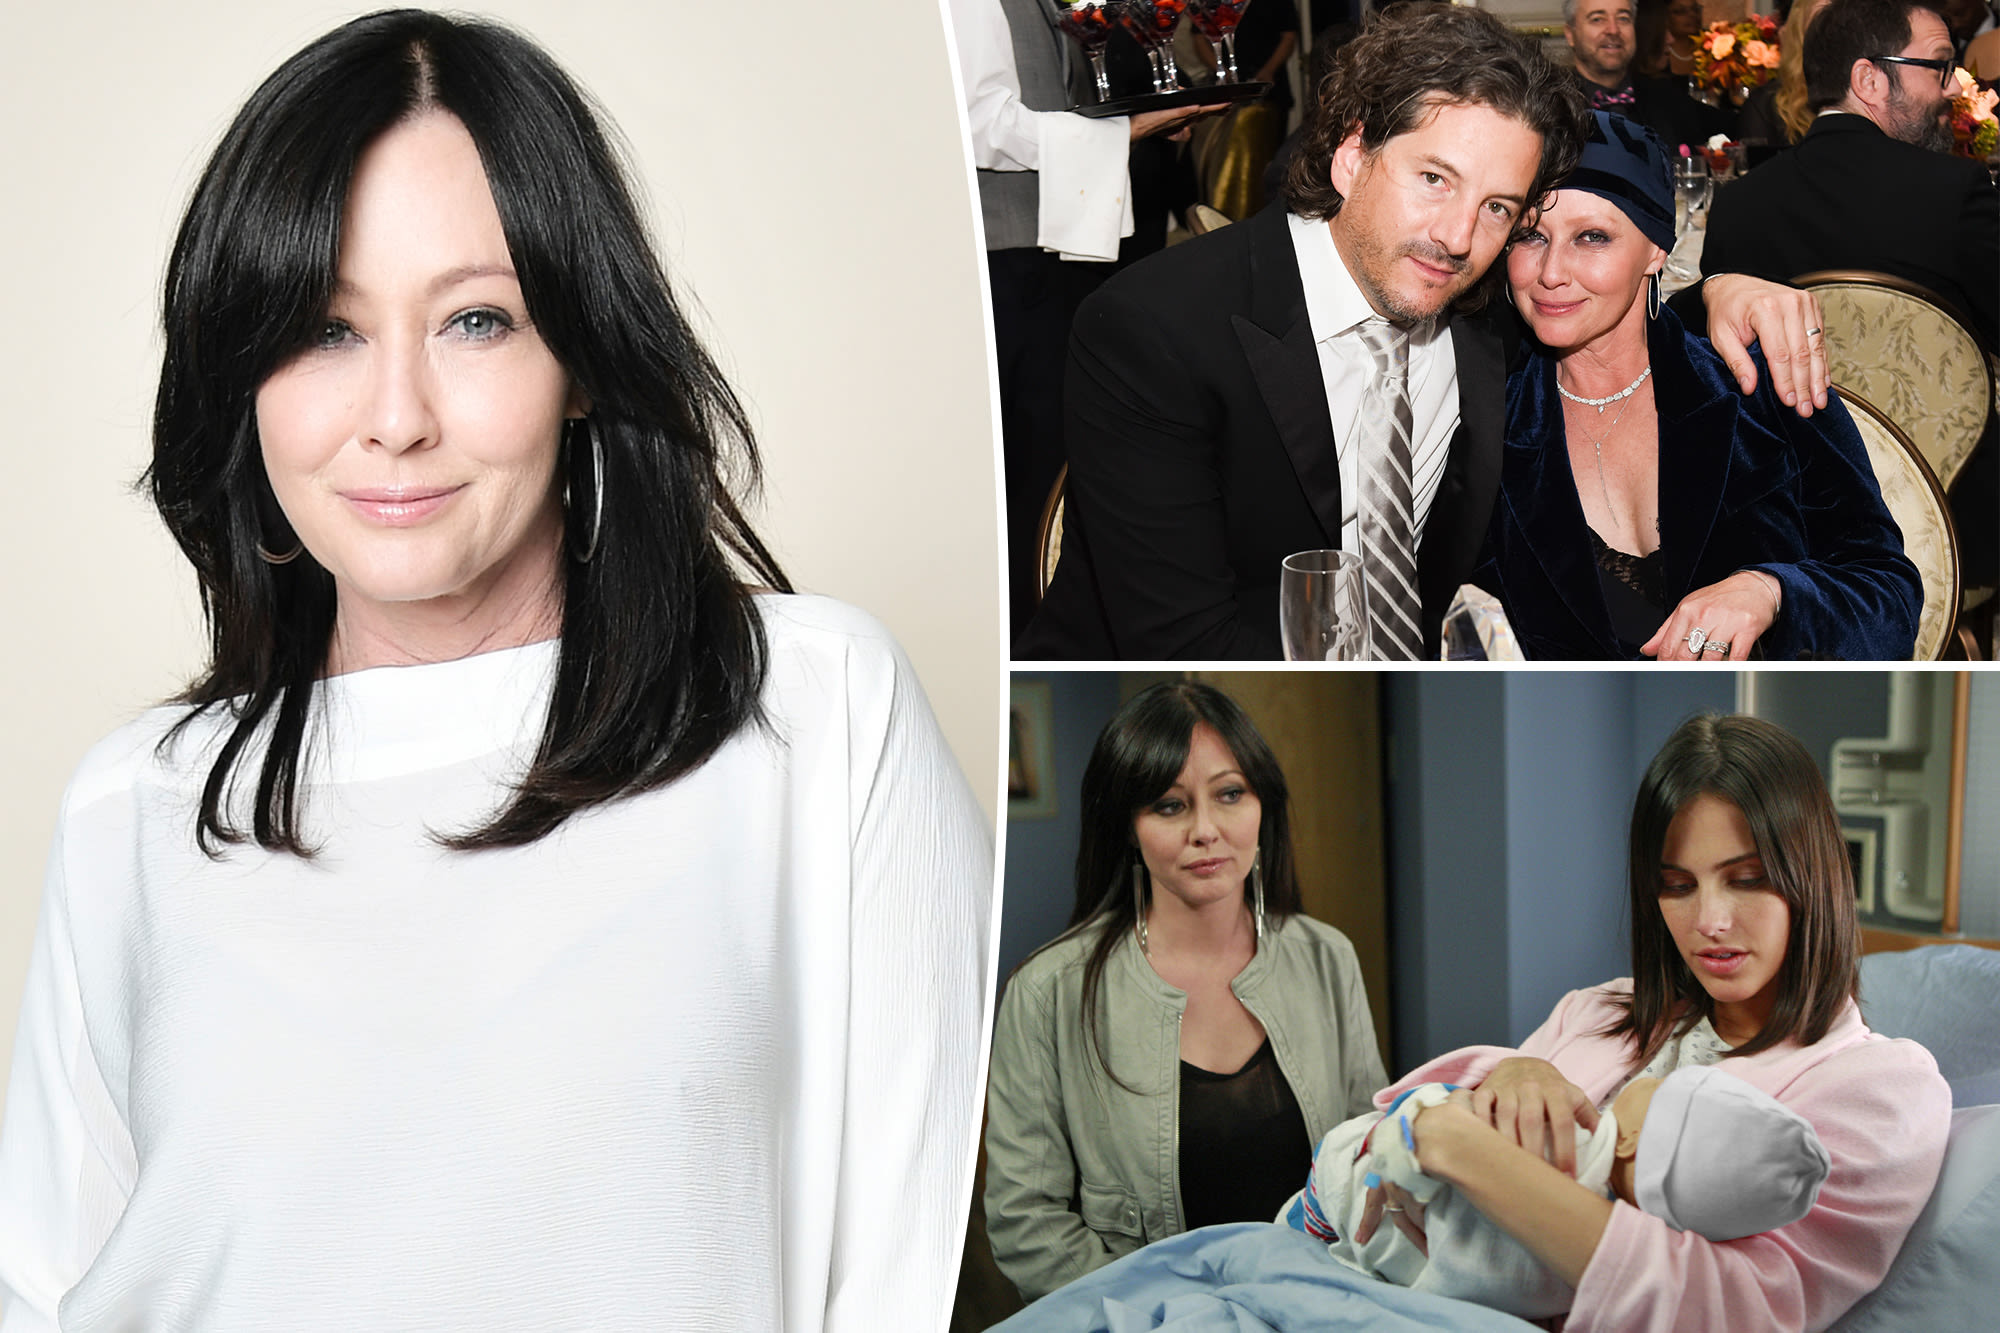 Shannen Doherty ‘desperately’ wanted children and to become a mom